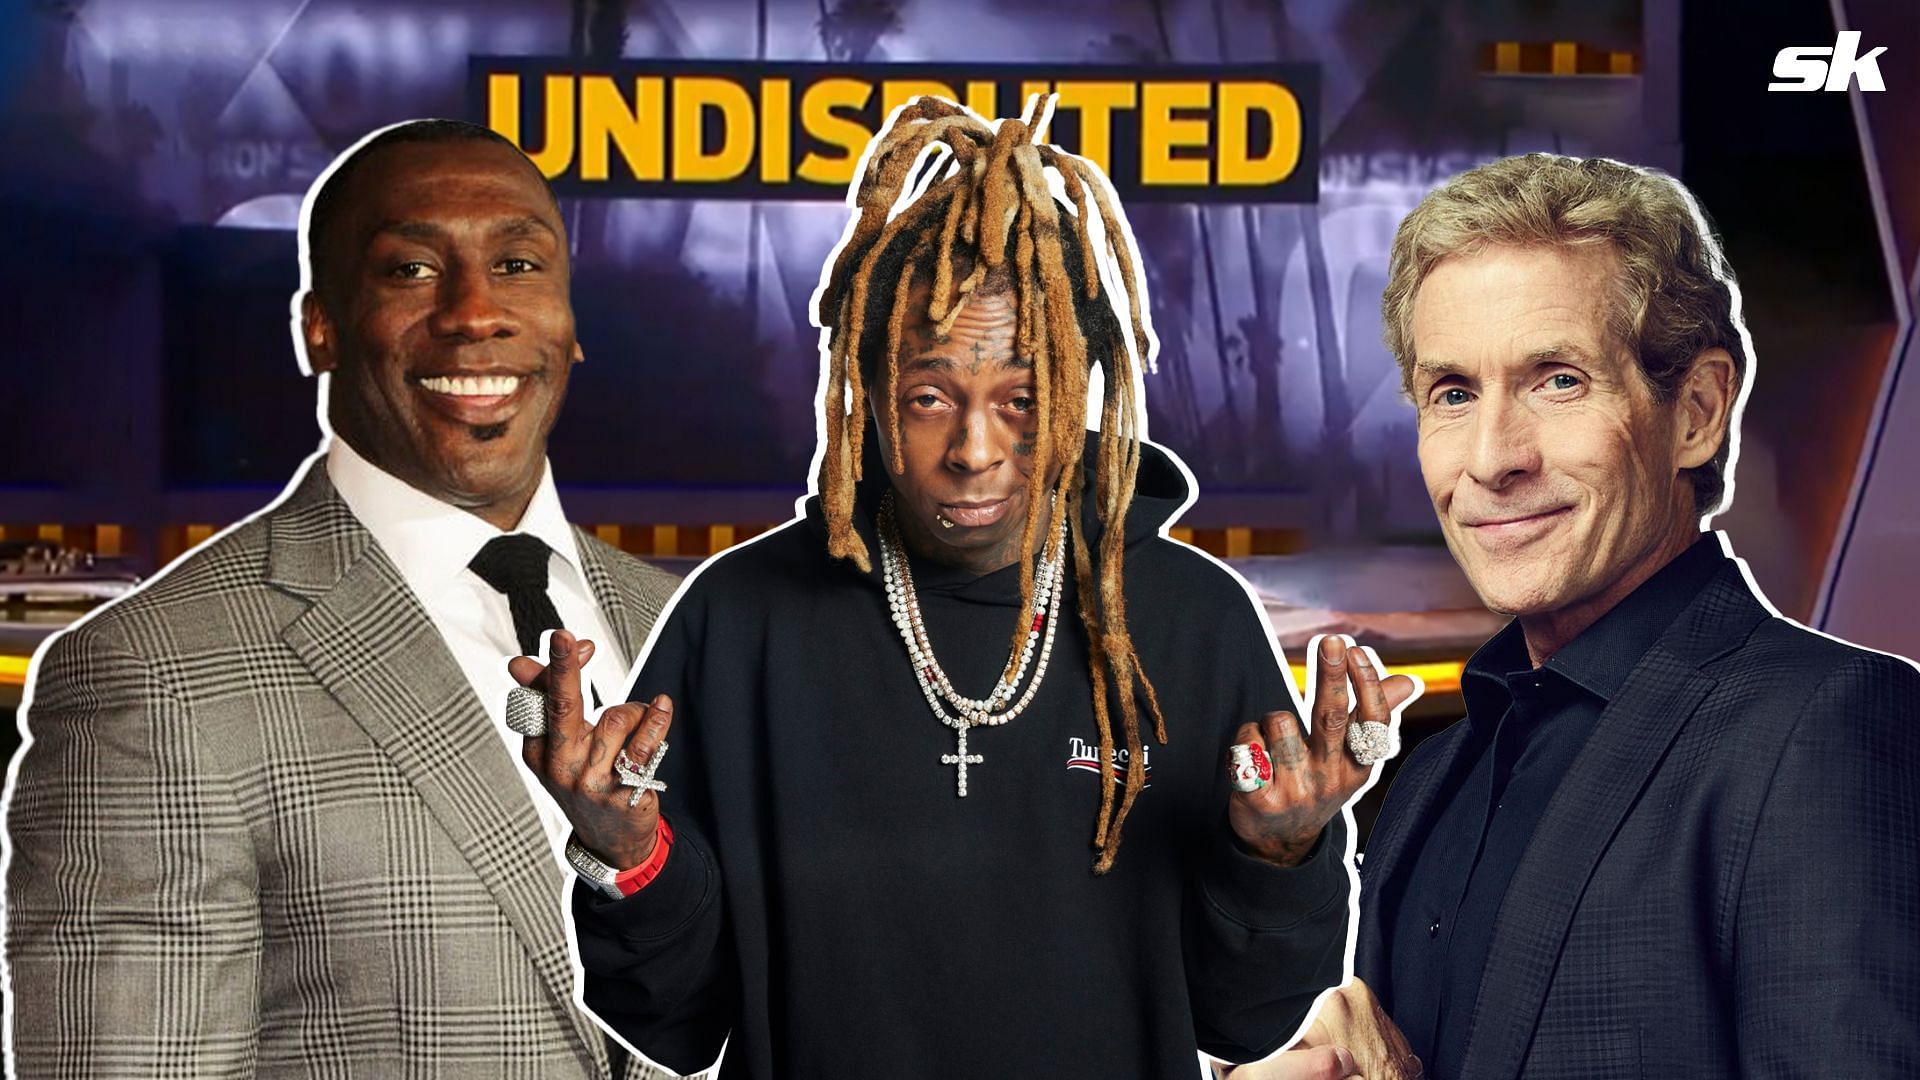 Could Lil Wayne be joining Skip Bayless on Undisputed?